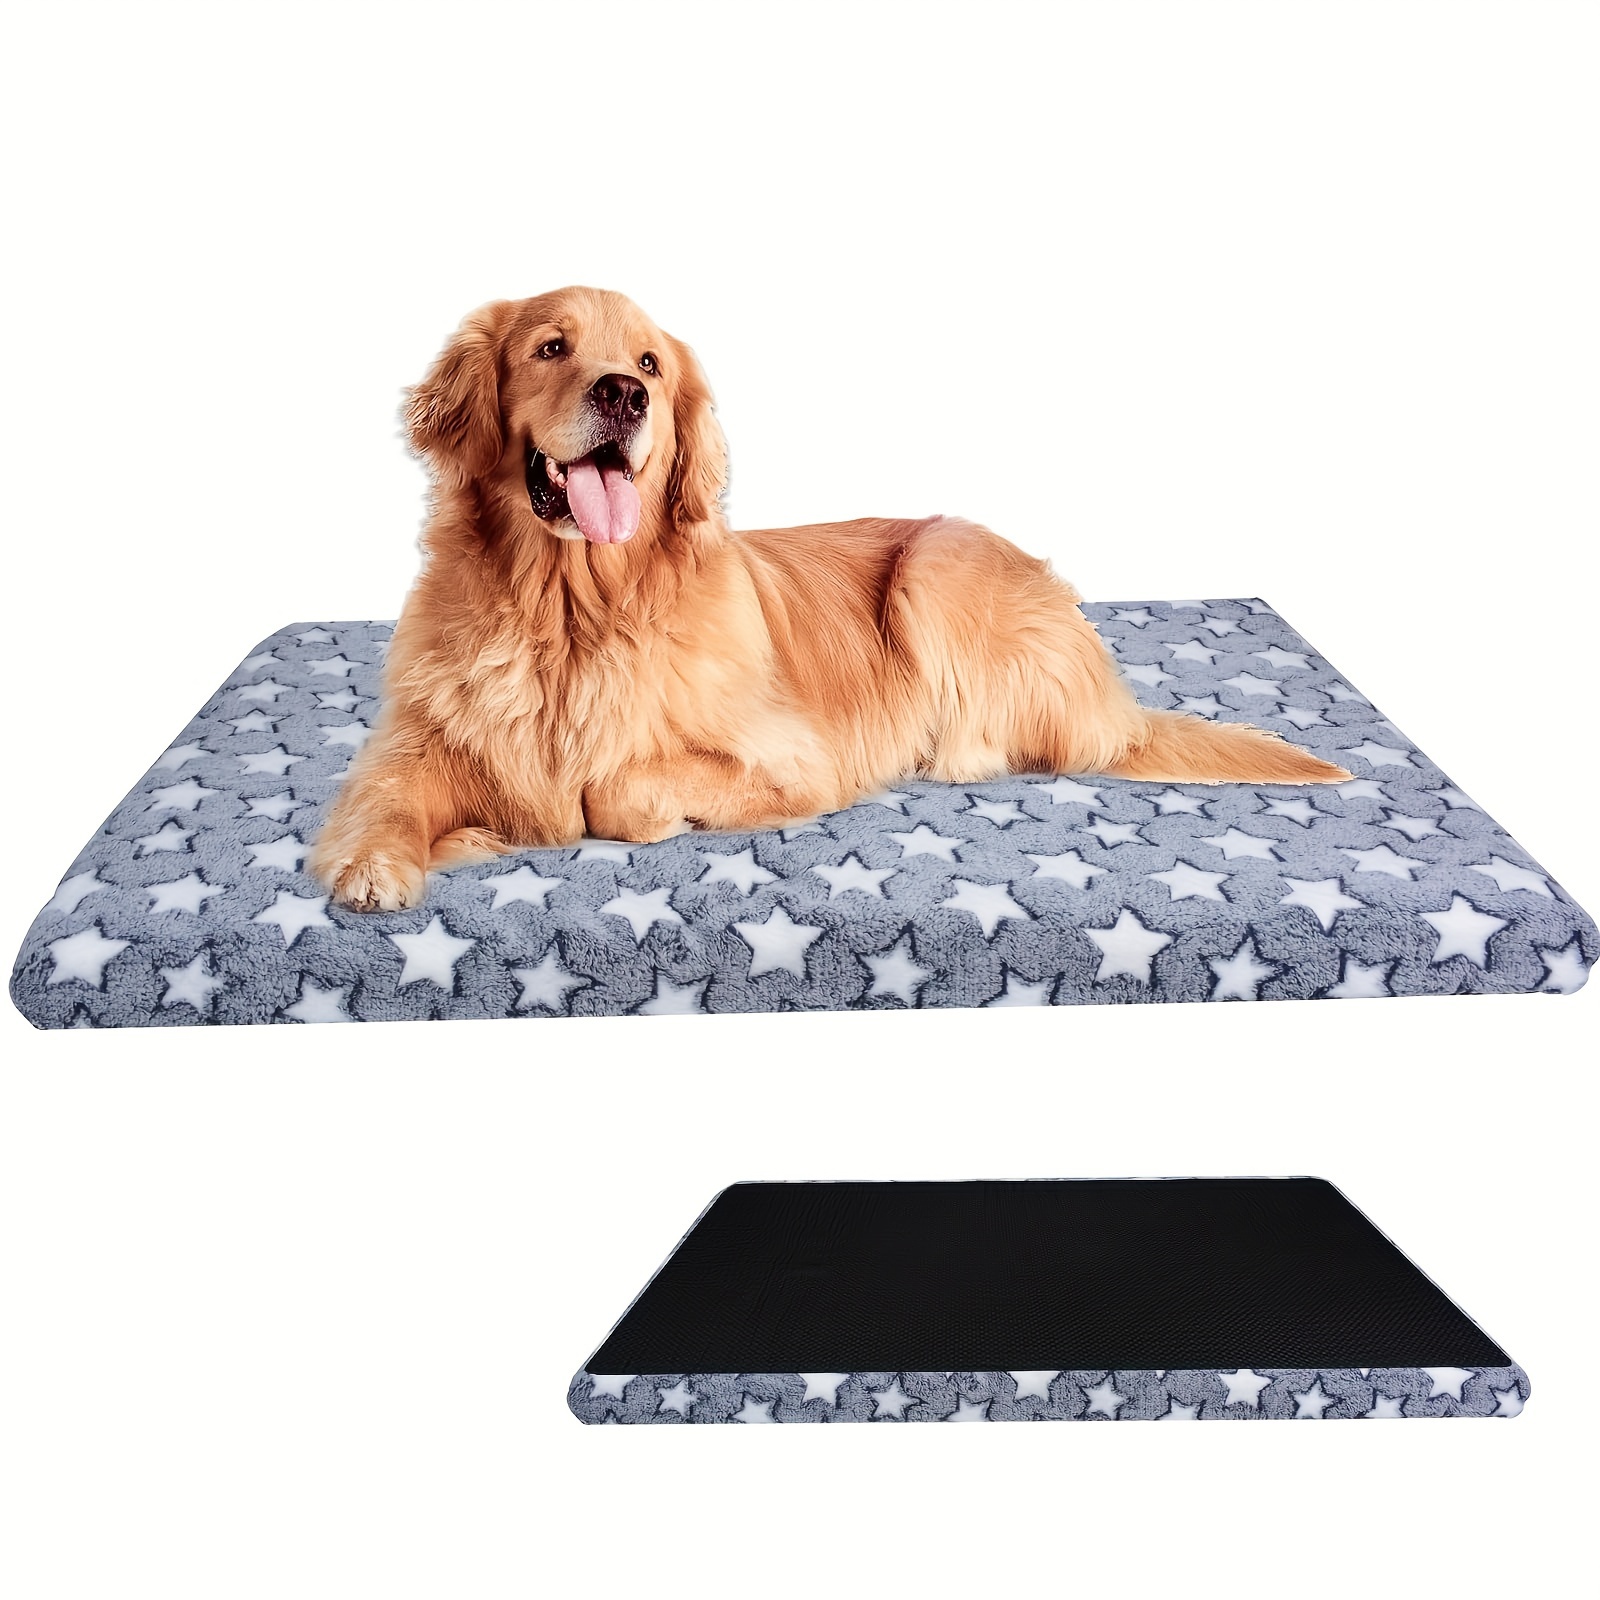 

Washable Dog Bed Mat, Dog Crate Pad With Removable Cover, Soft Fluffy Pet Sleeping Mat With Firm Support, Dog Mattress Cushion For Large Medium Small Dogs